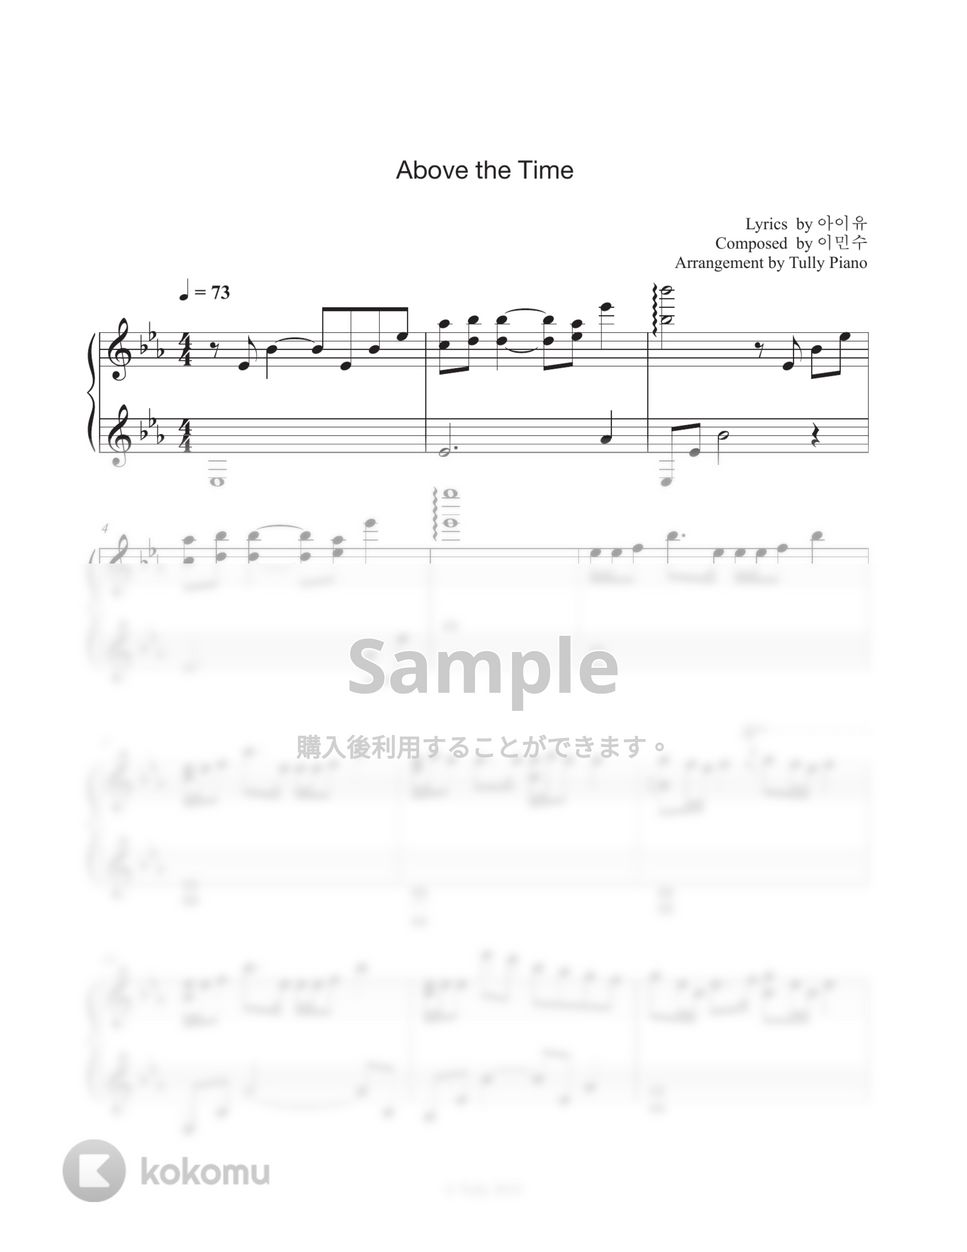 IU - 時間の外(Above the Time) by Tully Piano